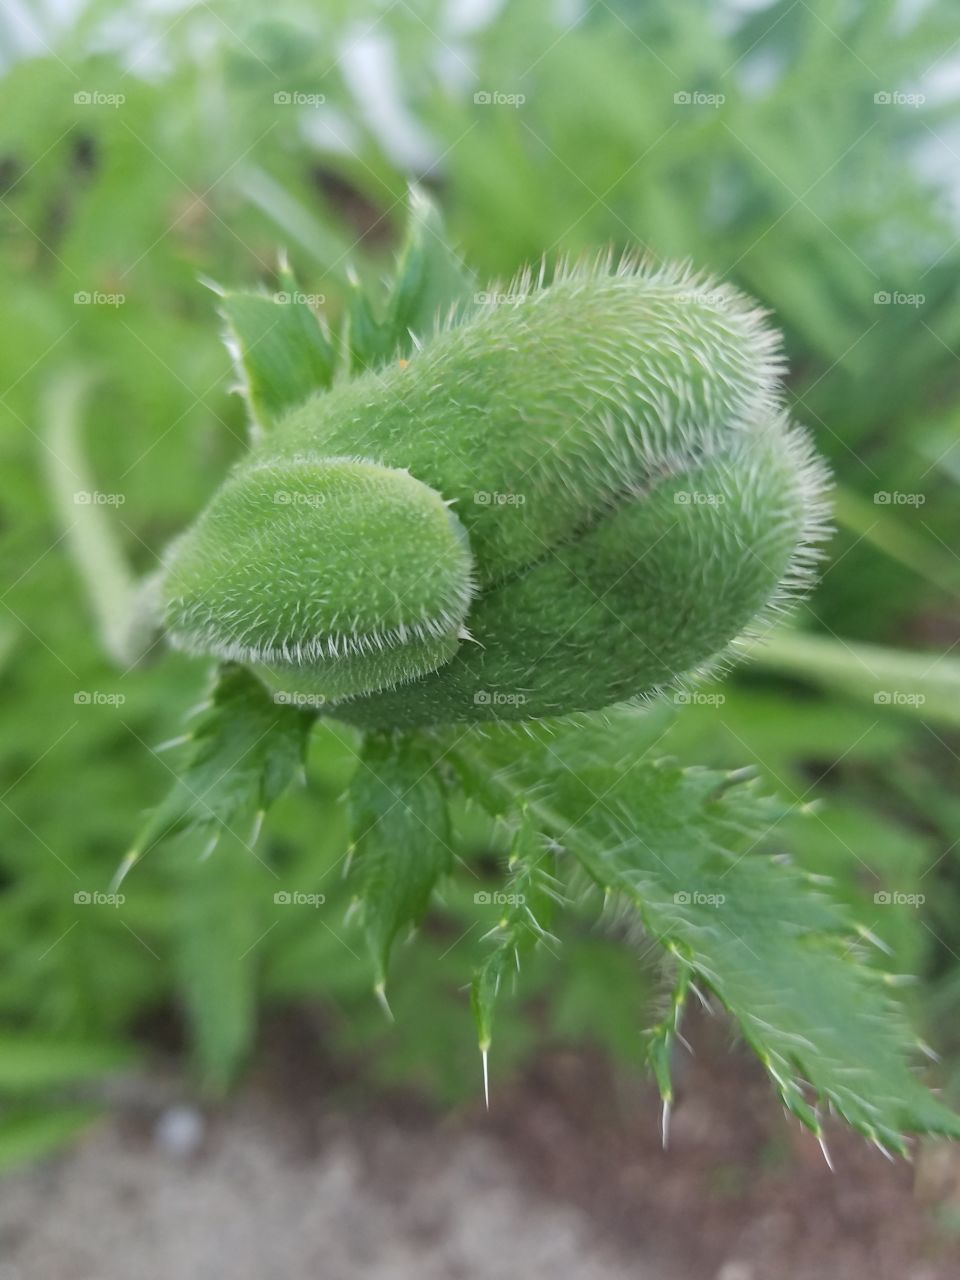 poppy bud about to bloom